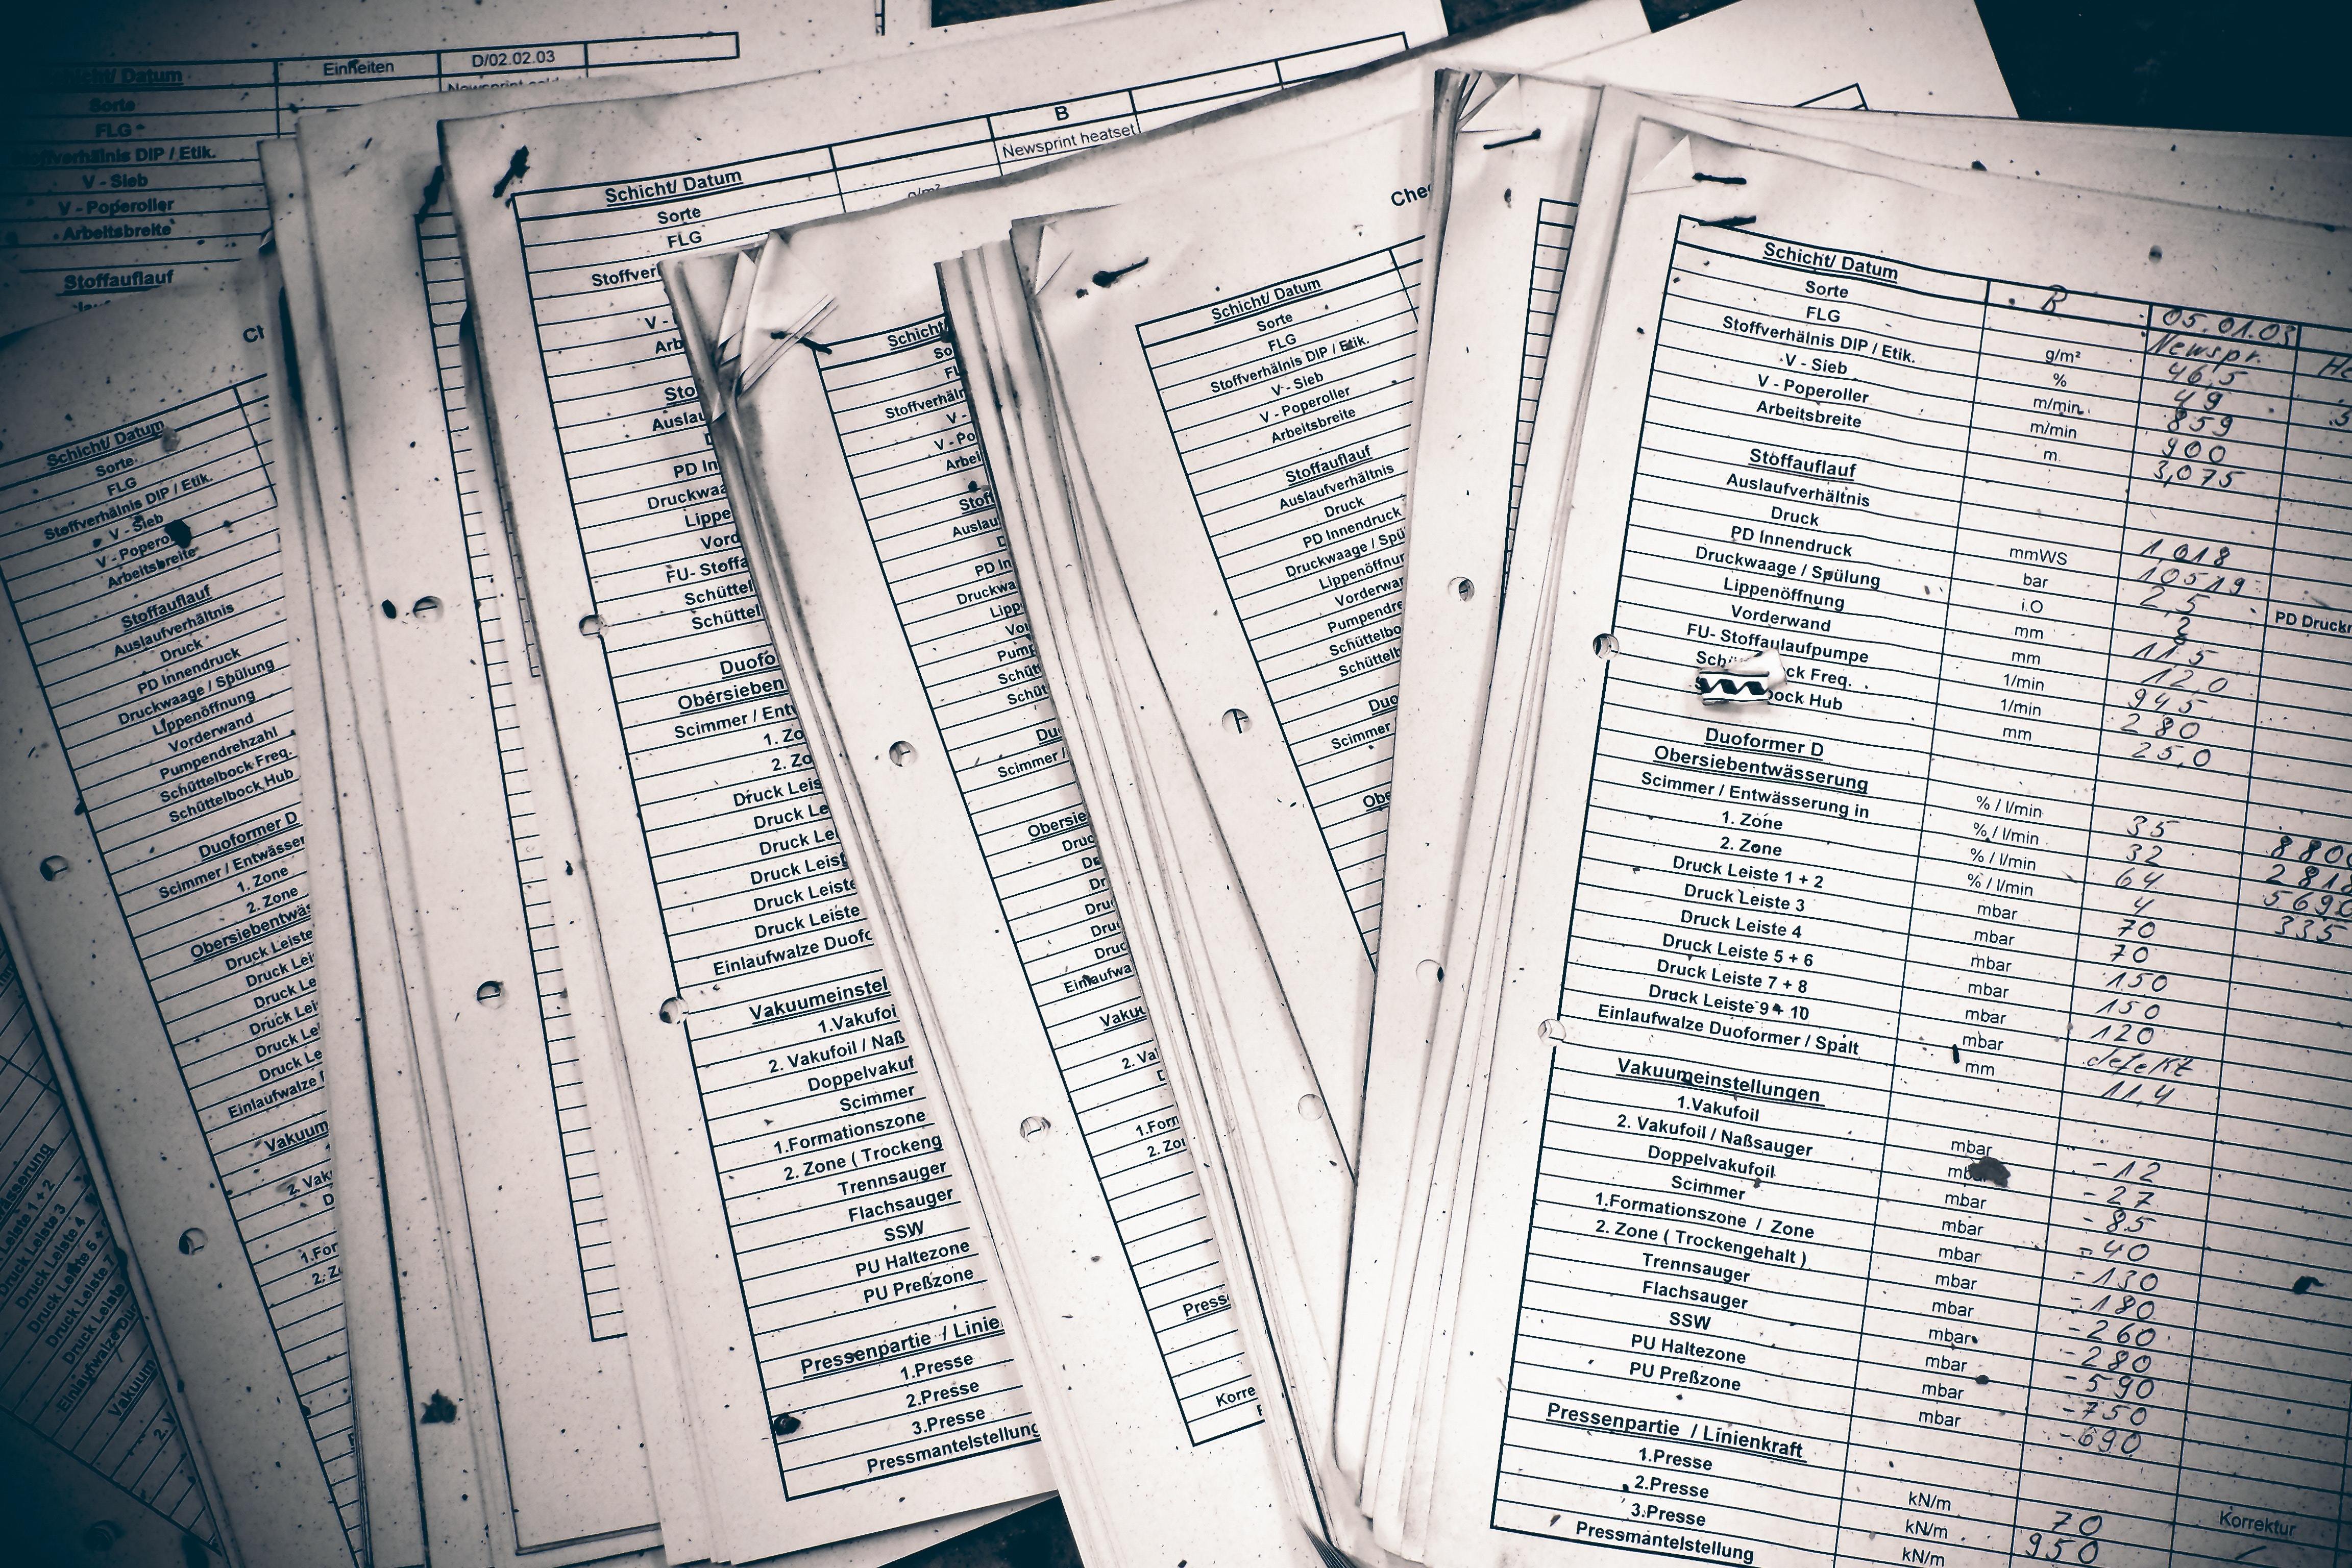 What you should know before you go “Paperless”